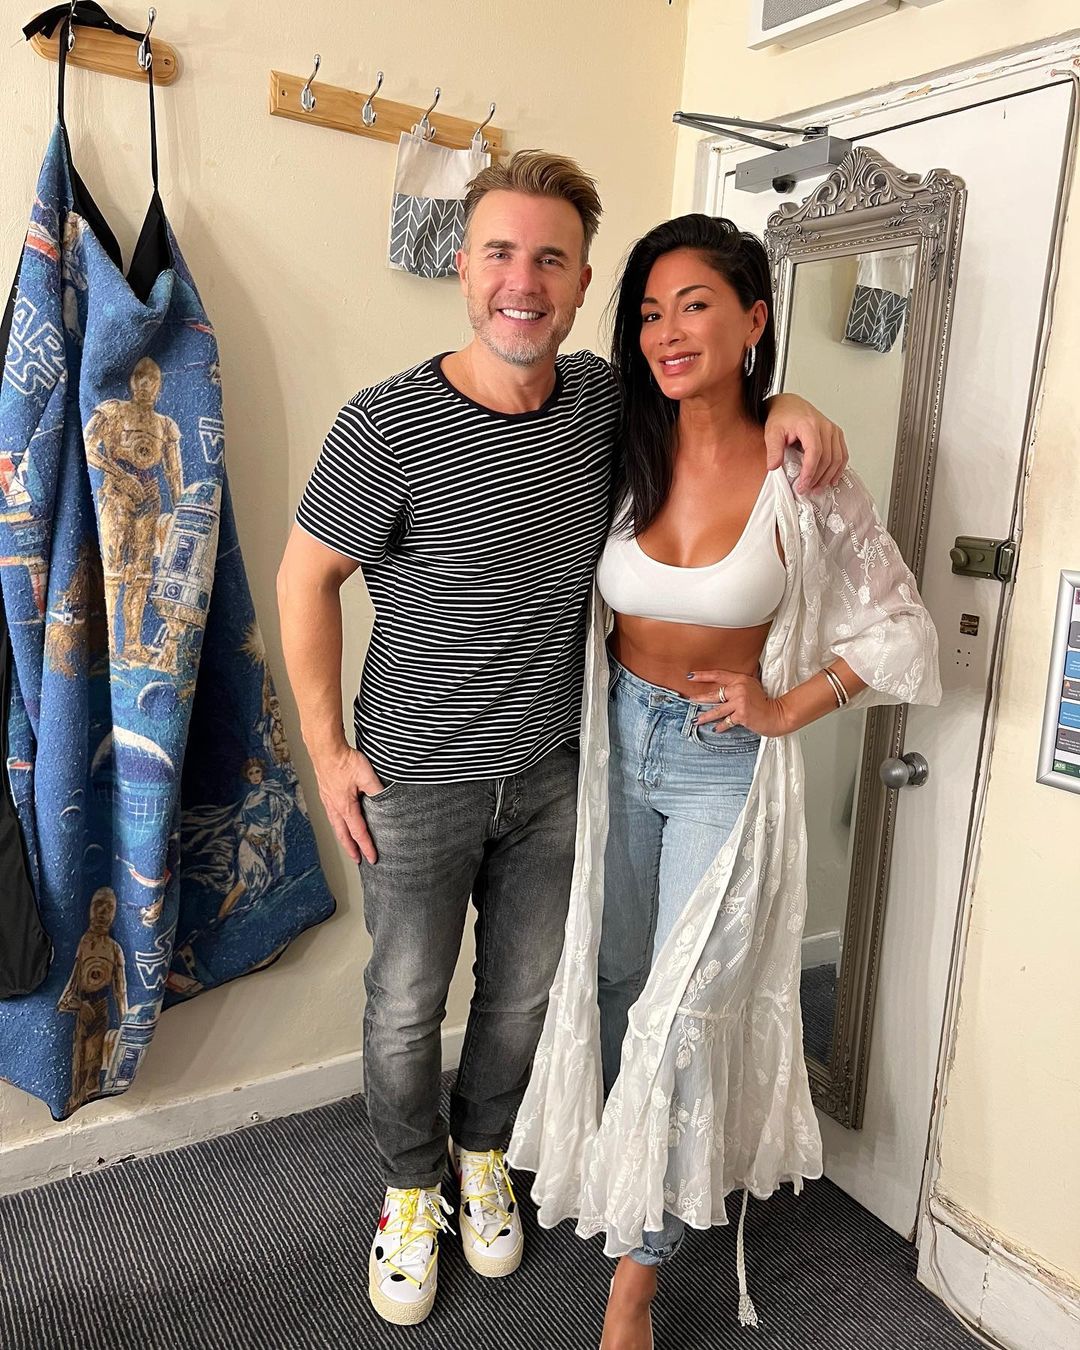 Was so awesome to see my dear friend @officialgarybarlow on “A Different Stage” with his revolutionary own show! You had me laughing, crying and singing my heart out! ???????? you Gaza!